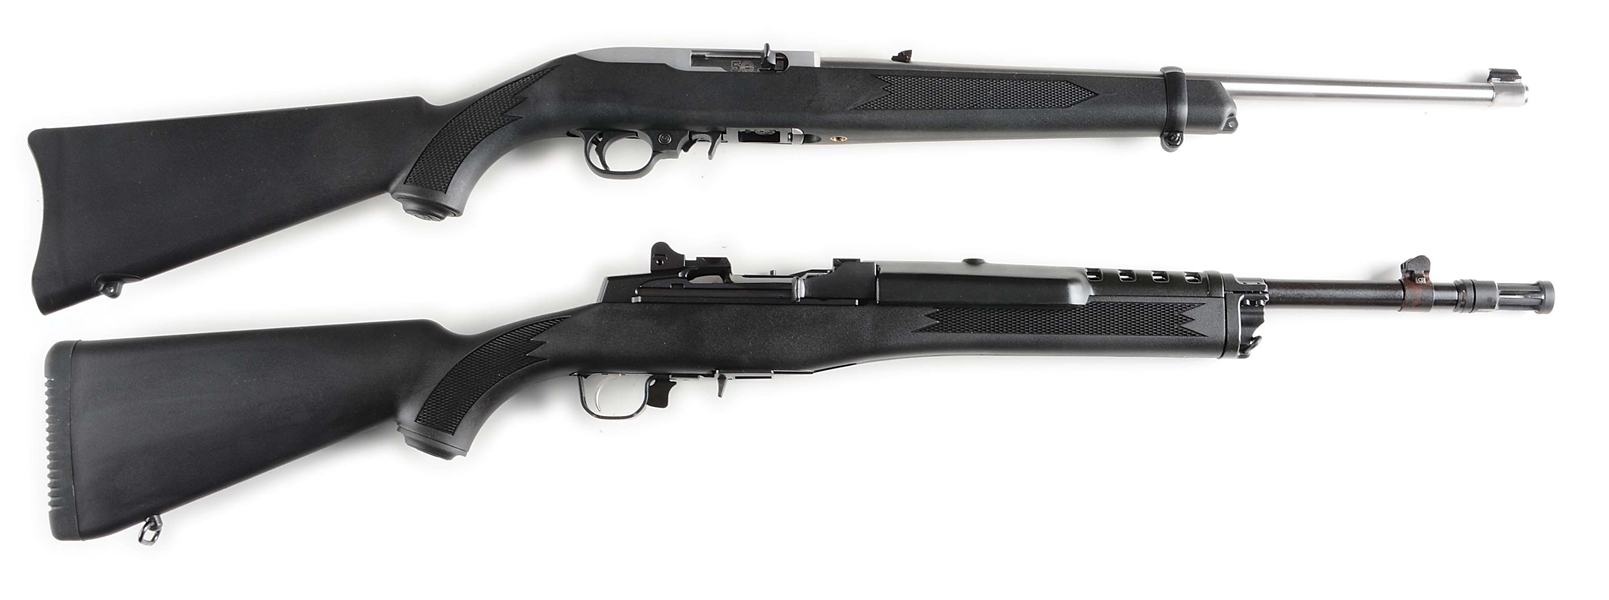 (M) LOT OF 2: ONE NIB RUGER 10/22 SEMI-AUTOMATIC RIFLE AND ONE NIB RUGER MINI 30